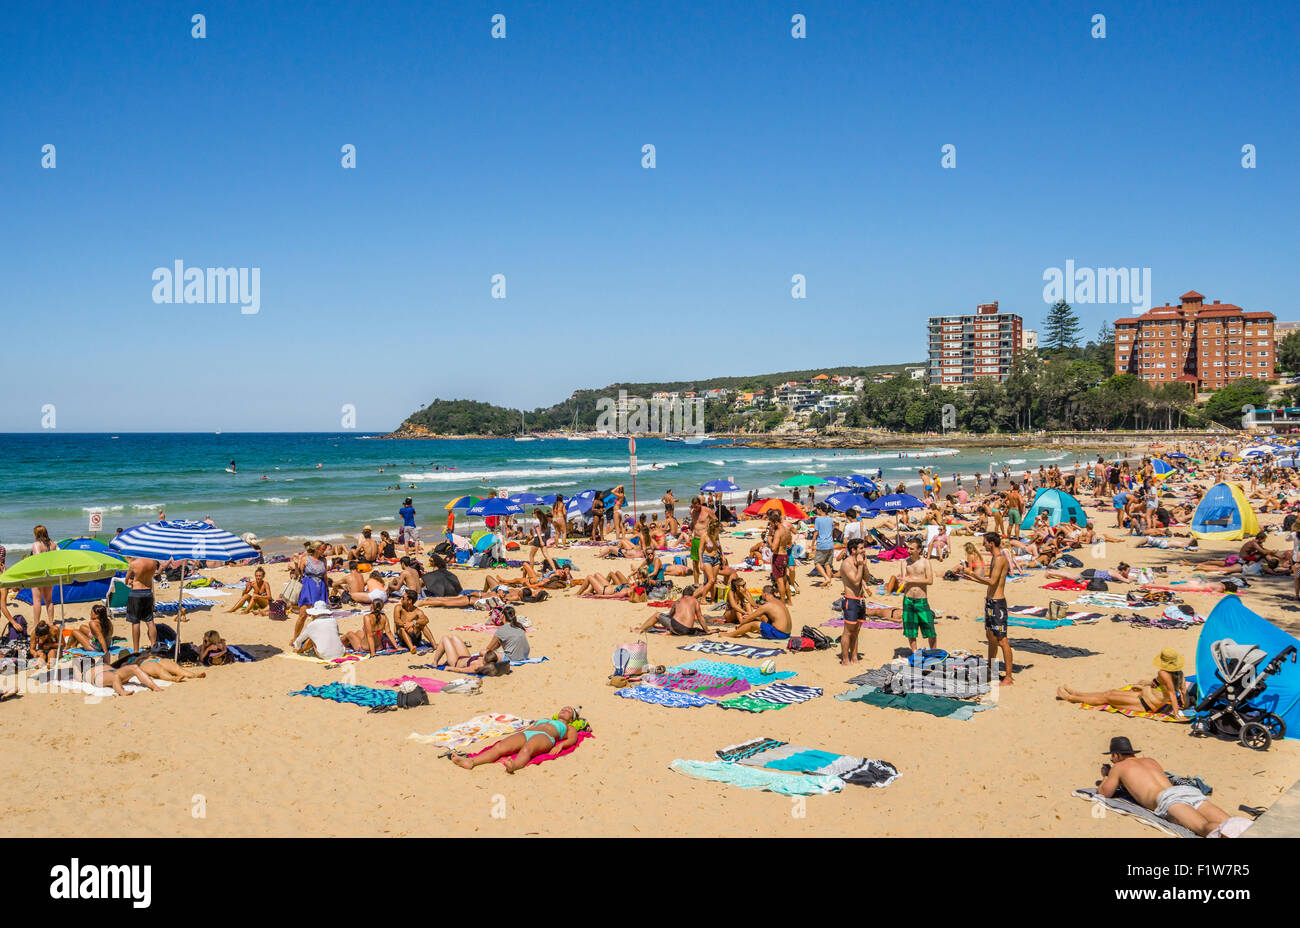 Australia, New South Wales, Manly, beach-side suburb of northern Sydney, view of Manly Beach on a sunny summer day Stock Photo